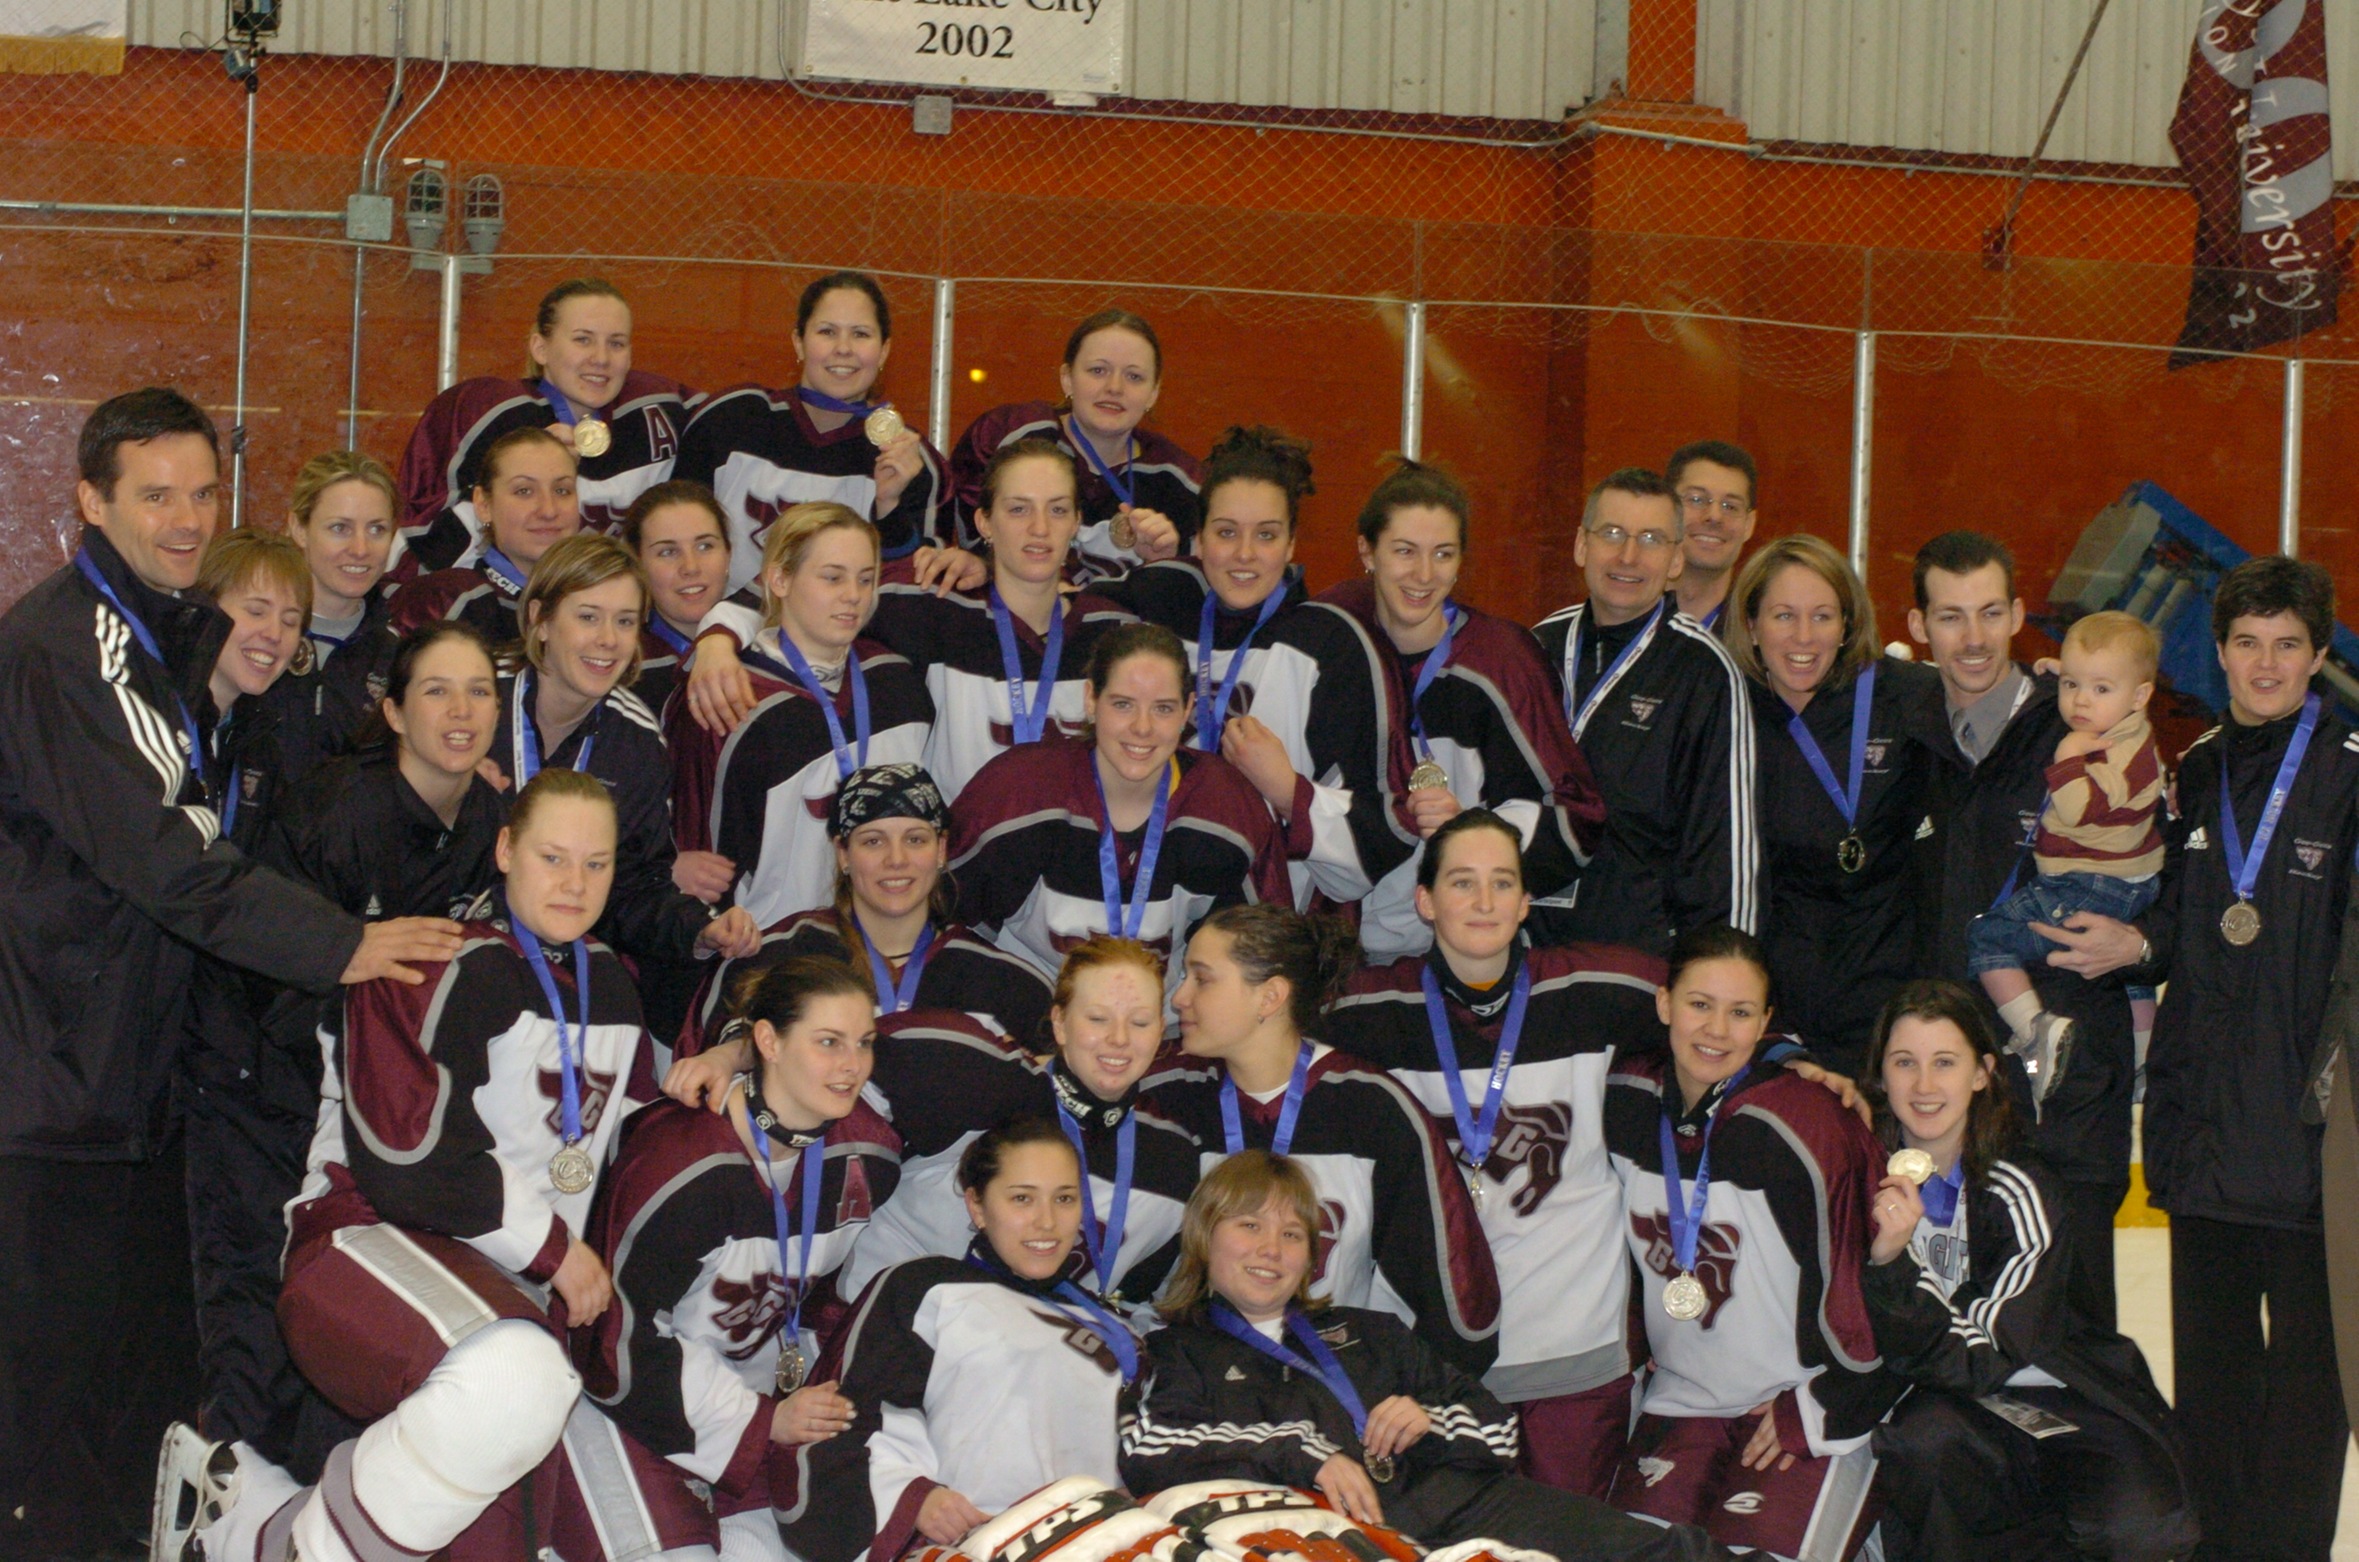 Hockey team group photo, 2004 with silver medals